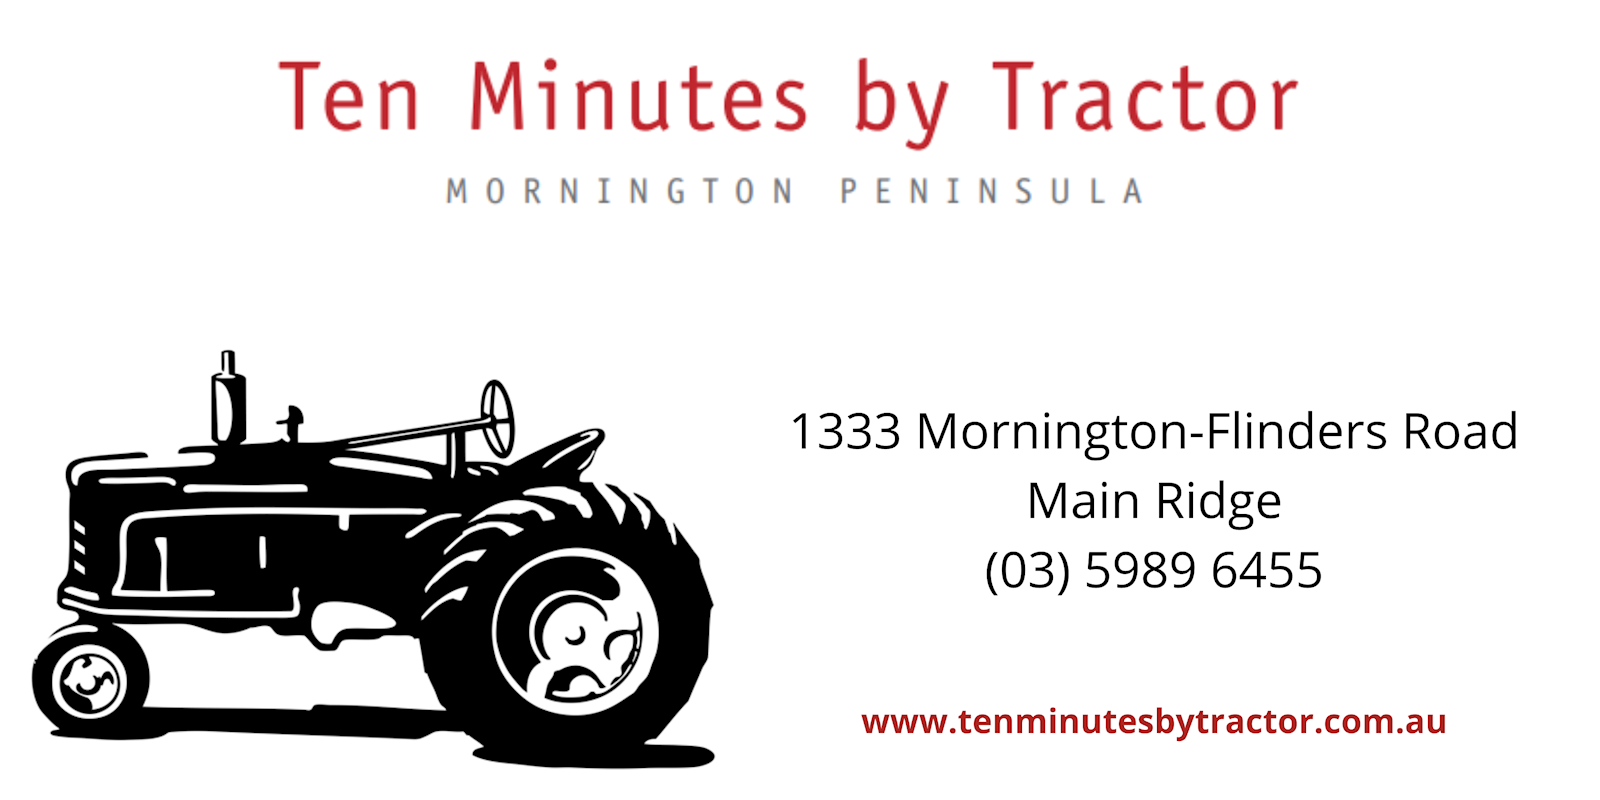 10 Minutes by Tractor